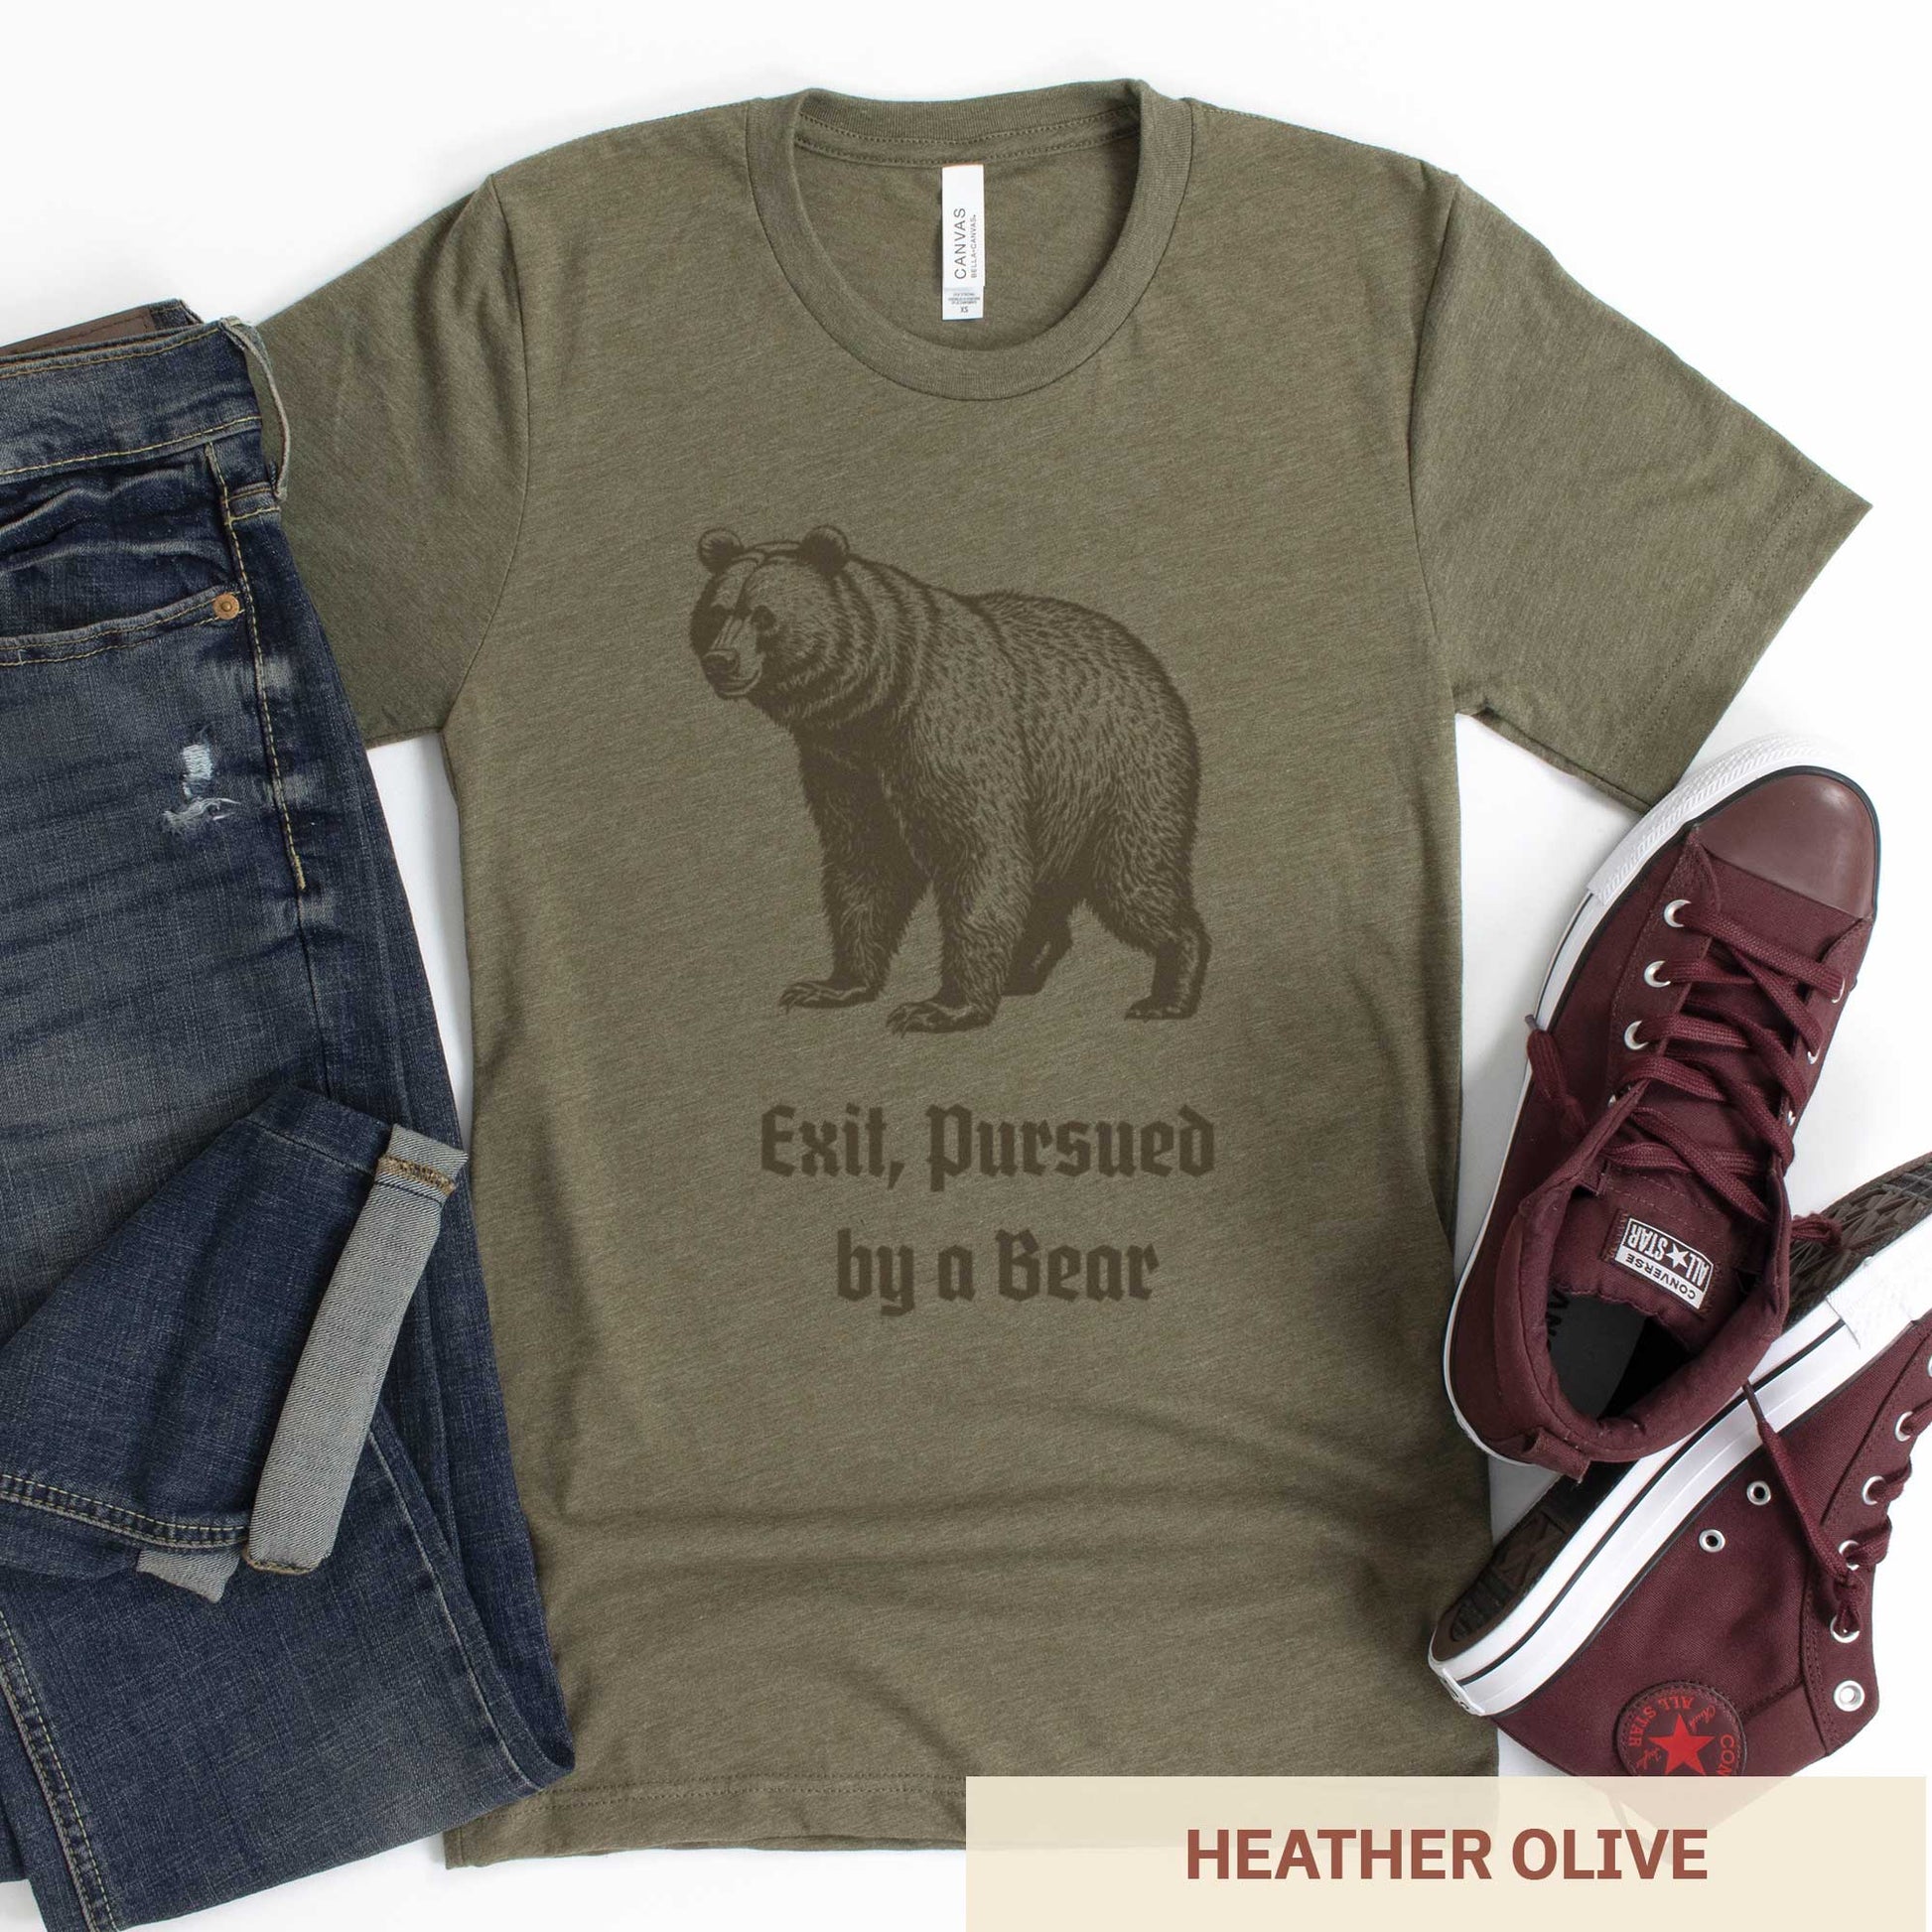 A heather olive Bella Canvas t-shirt featuring a vintage looking bear with the words exit, pursued by a bear.